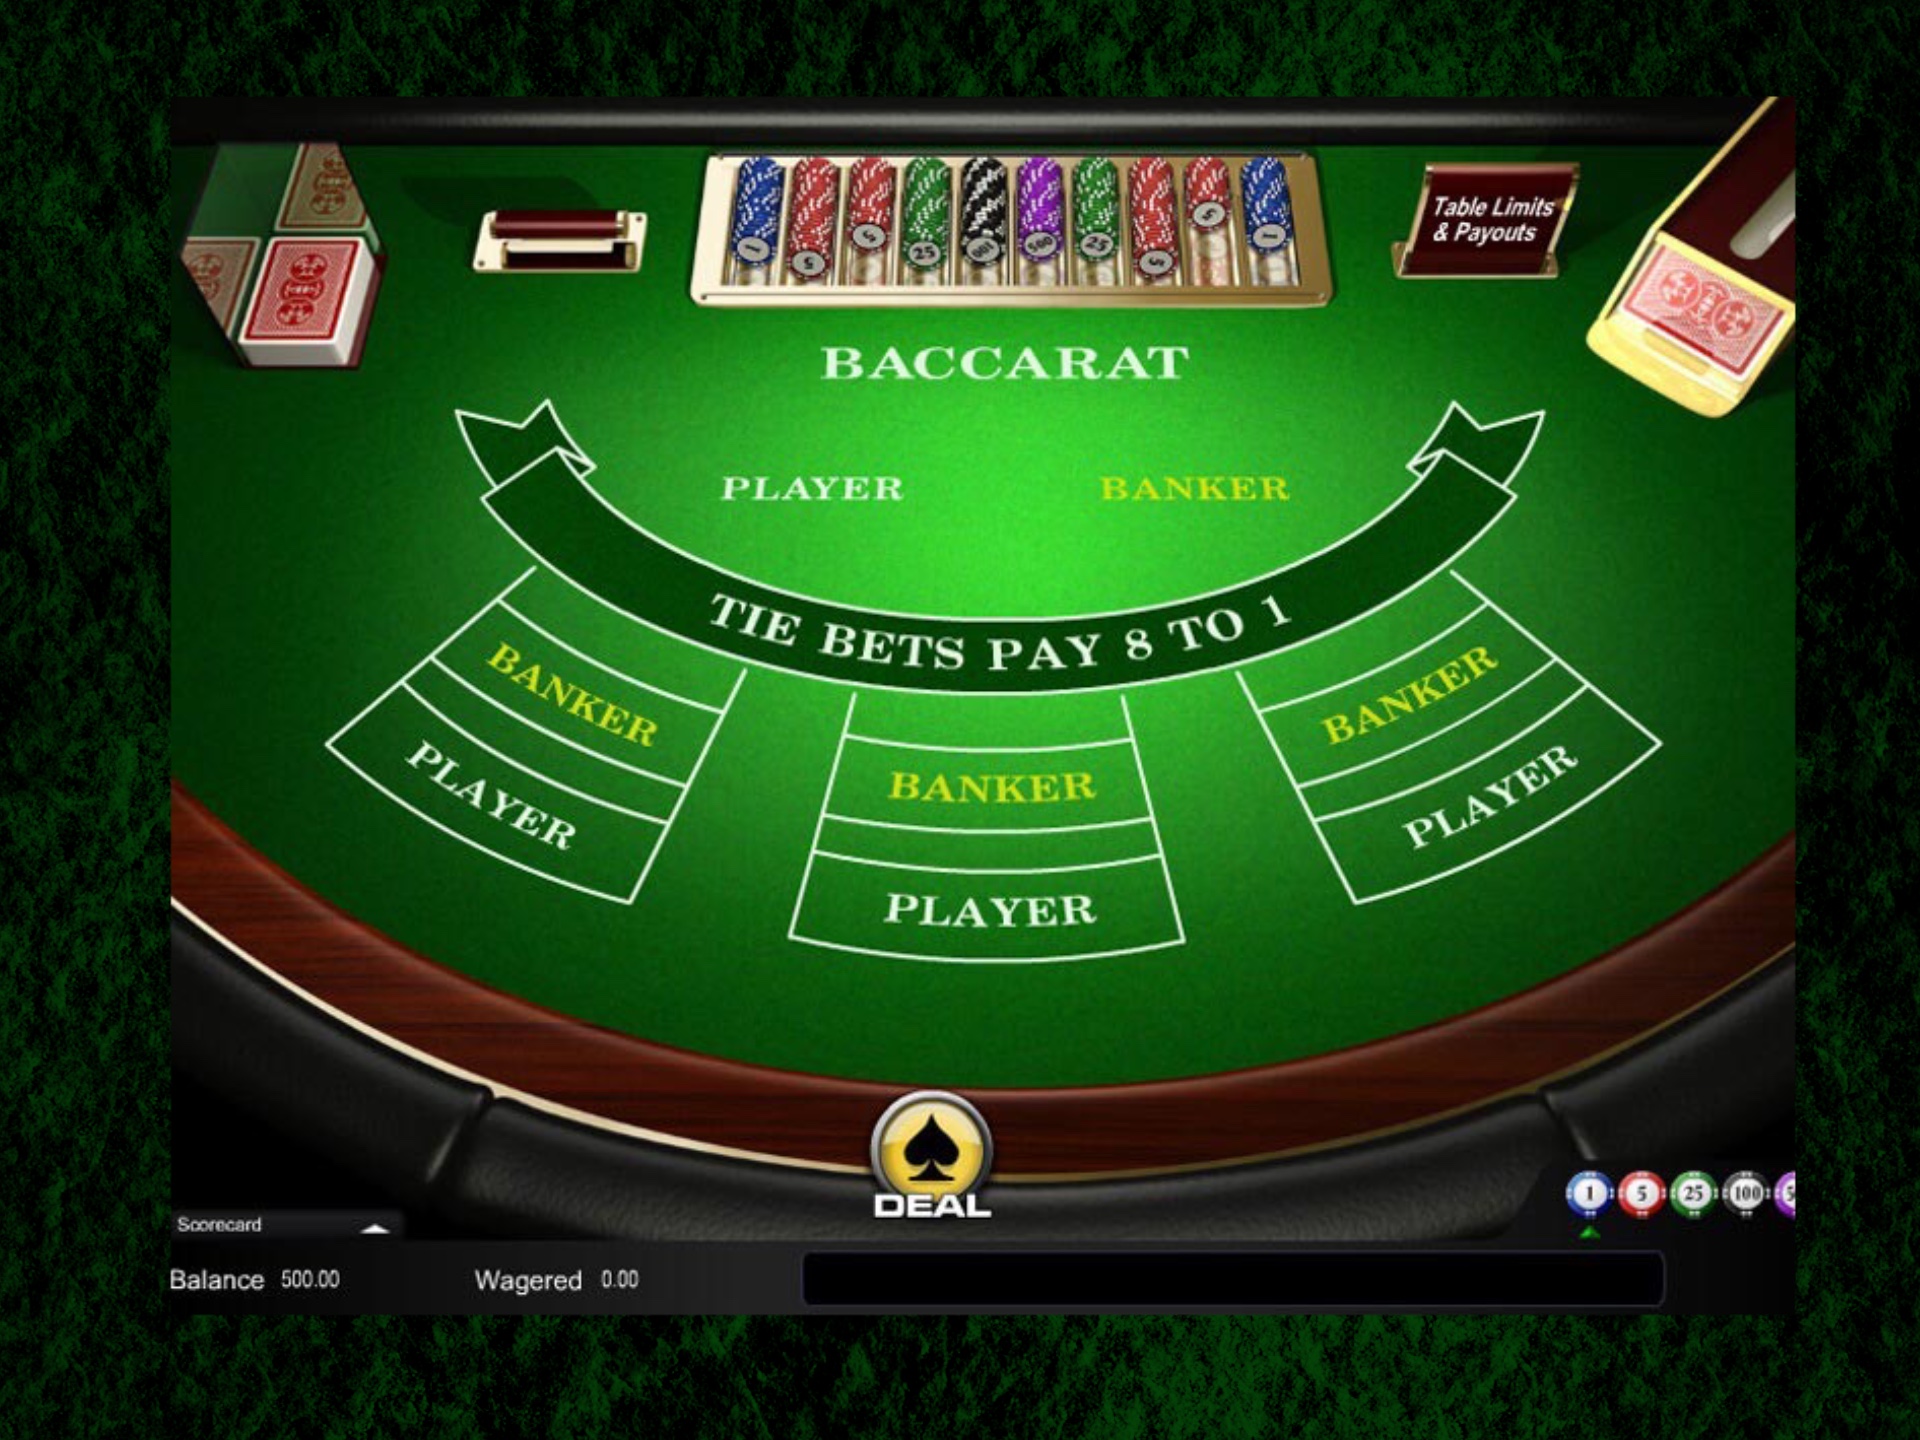 Play baccarat legaly at an online casino in India.